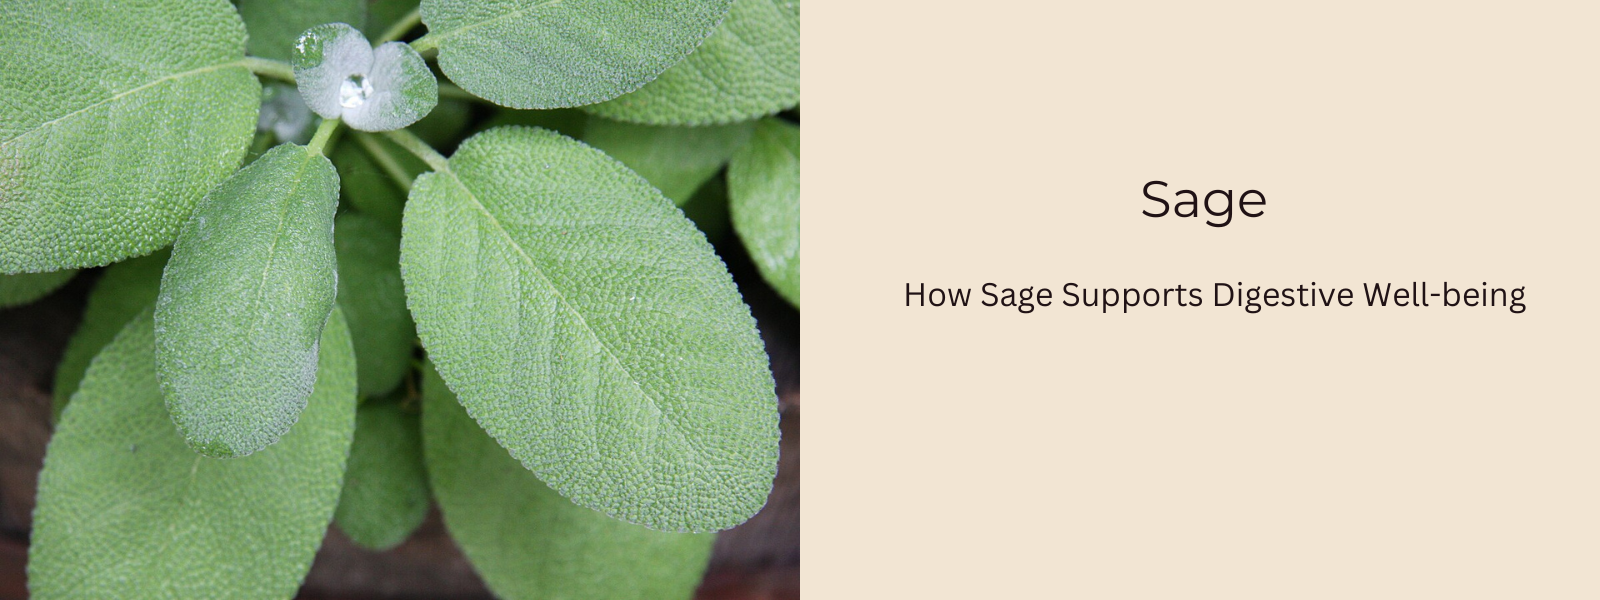 Sage Advice: How Sage Supports Digestive Well-being